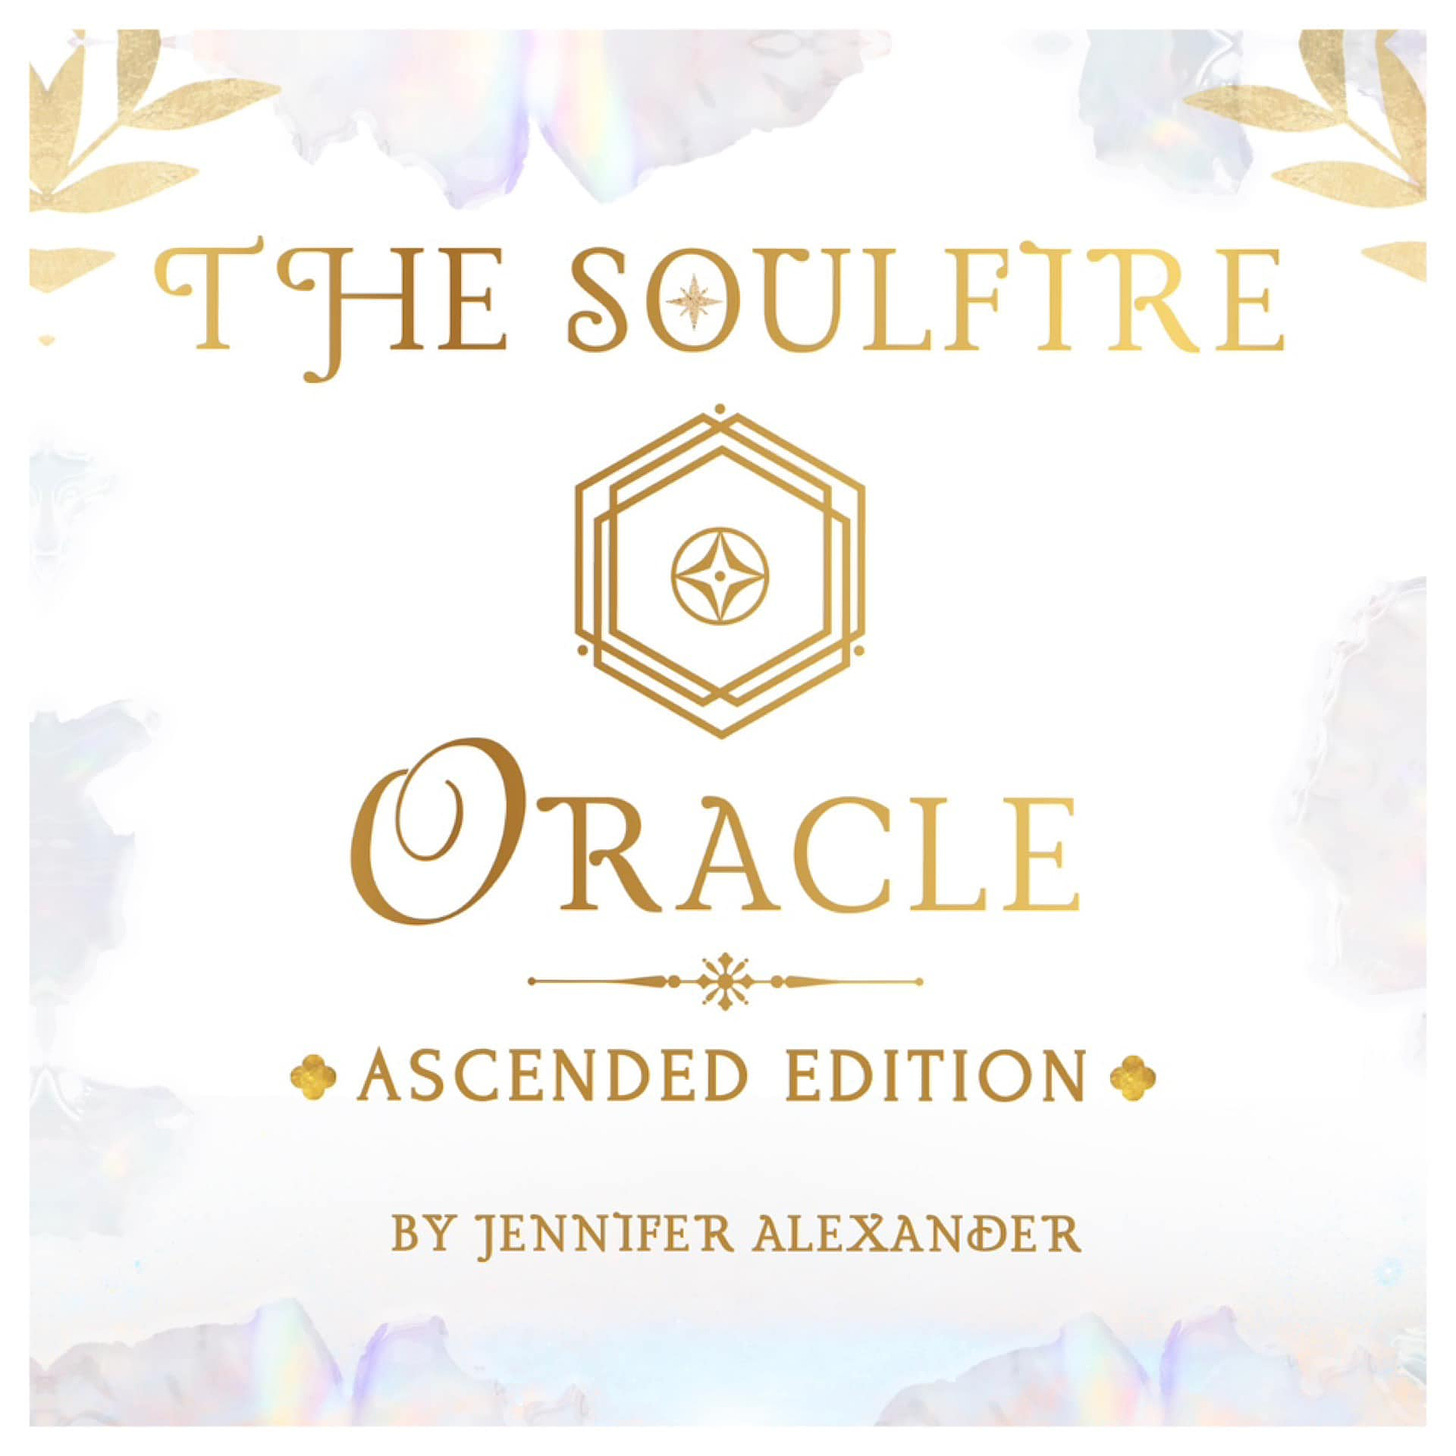 May be an image of text that says 'THE SOULFIRE ORACLE ASCENDED EDITION BY JENNIFER ALEXANDER'